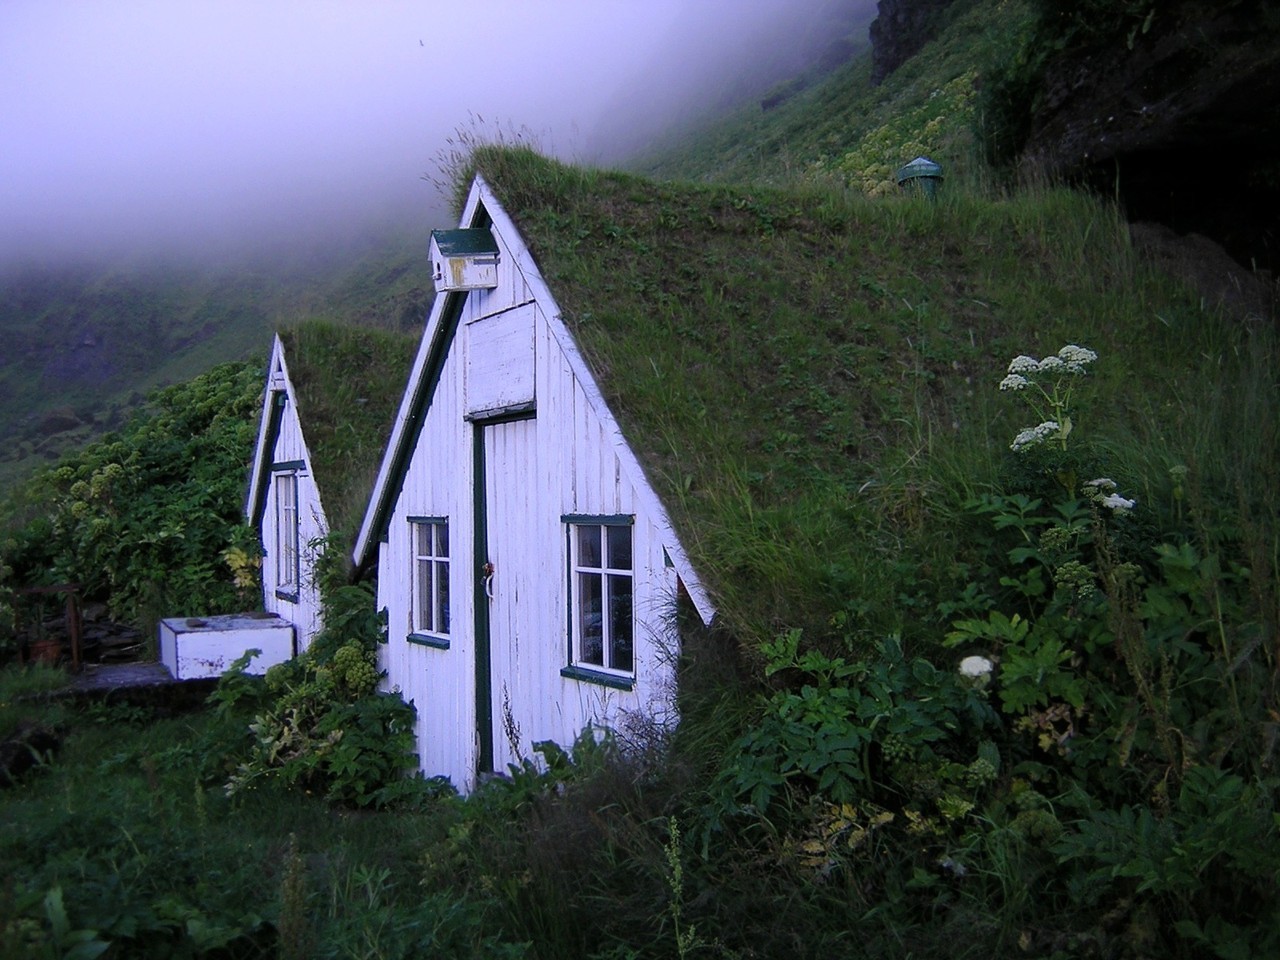 cabinporn:Sod roof houses in Vik, Iceland. Photo by Gilles Baldet. The birdhouses